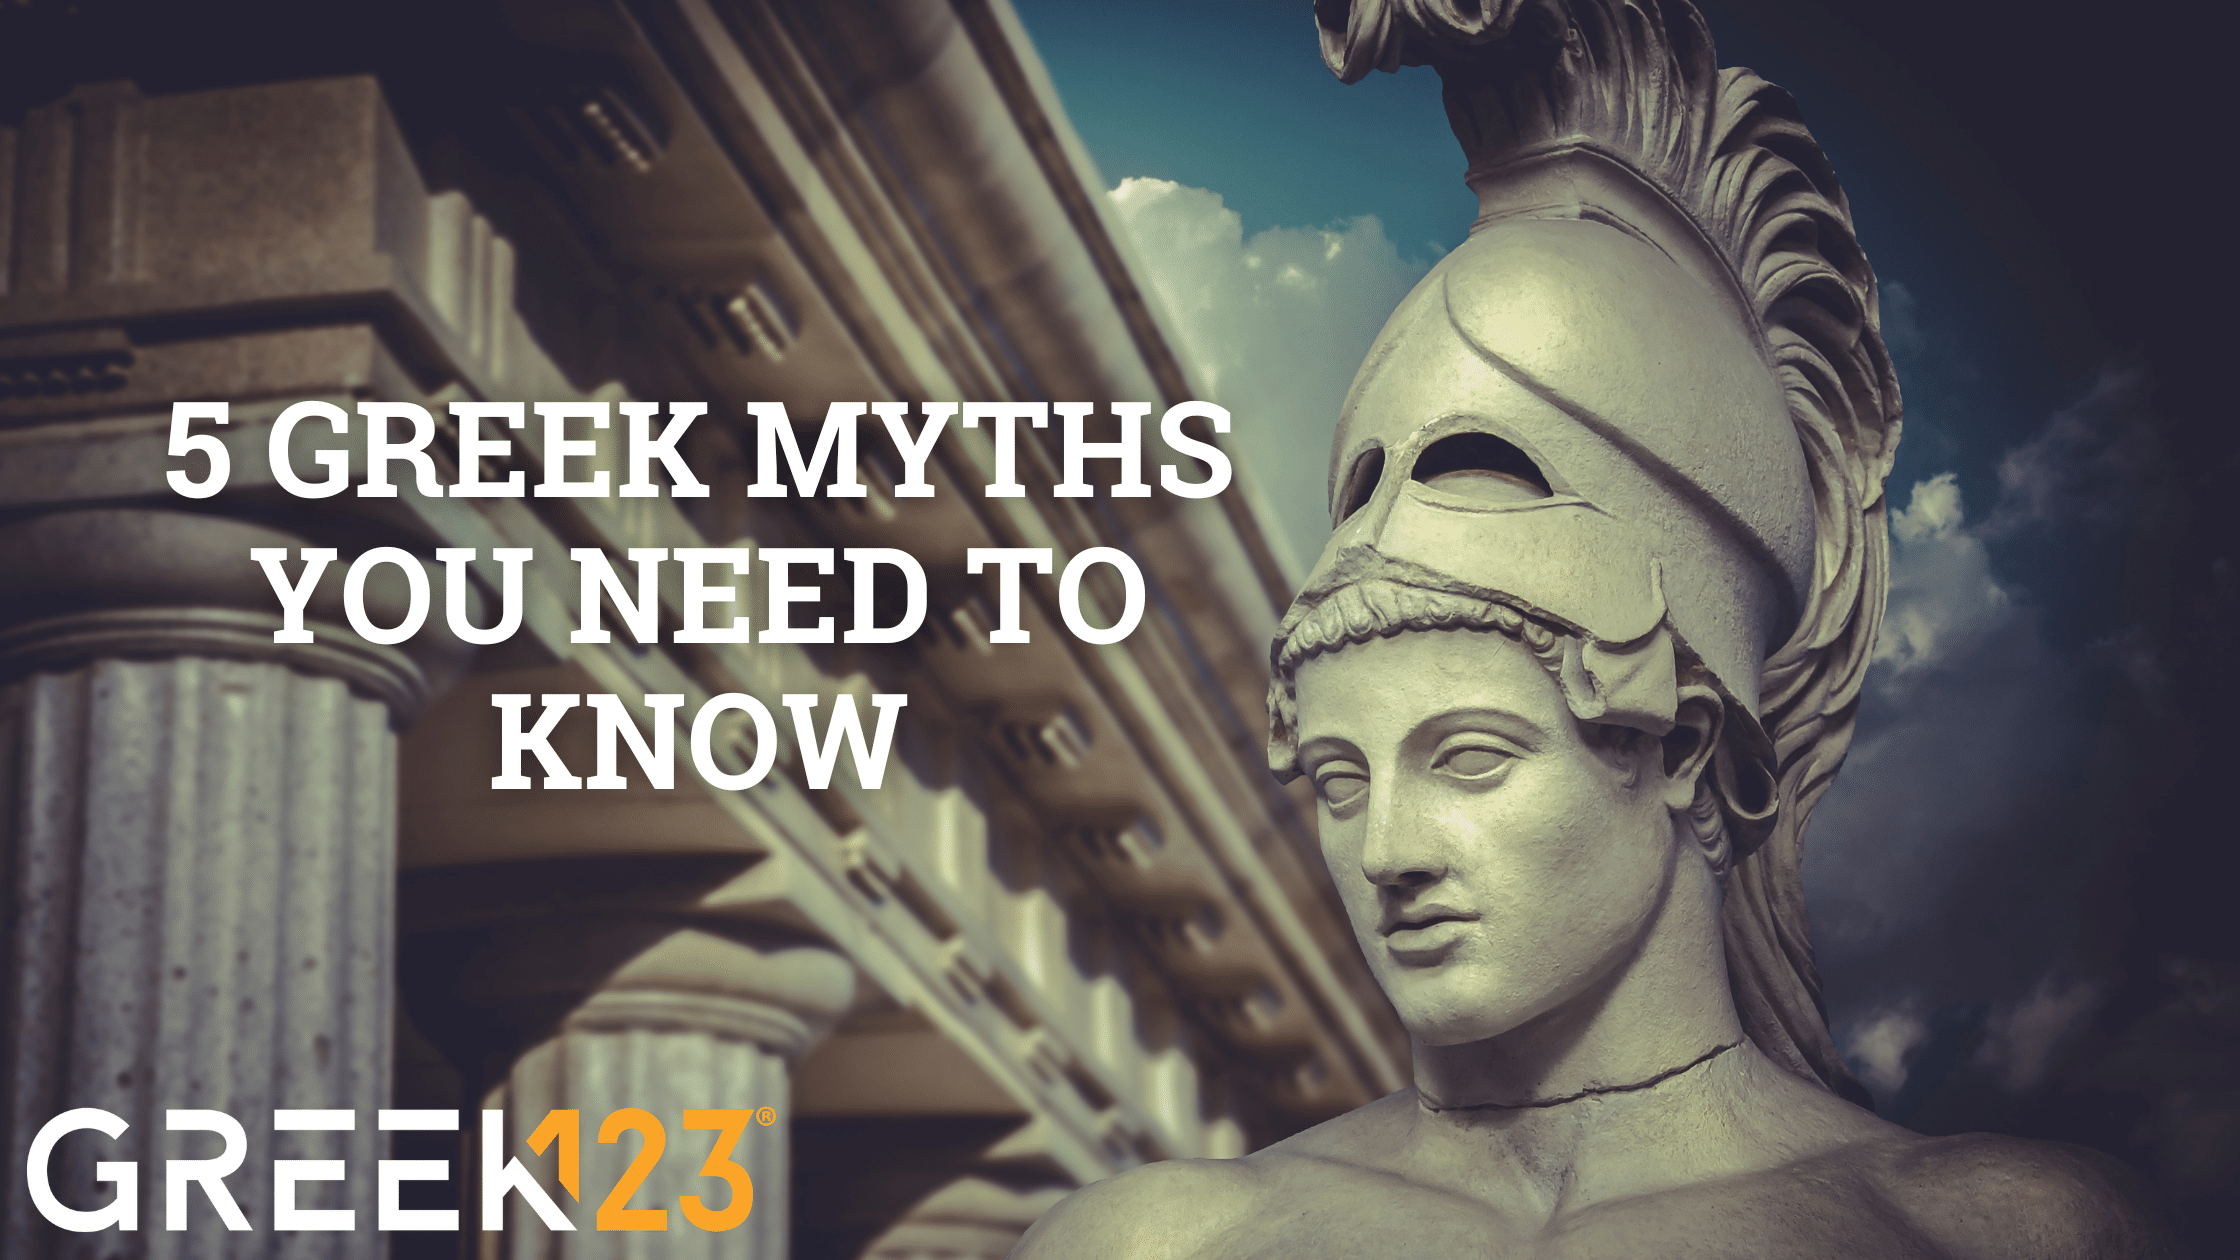 5 Greek Myths You Need To Know